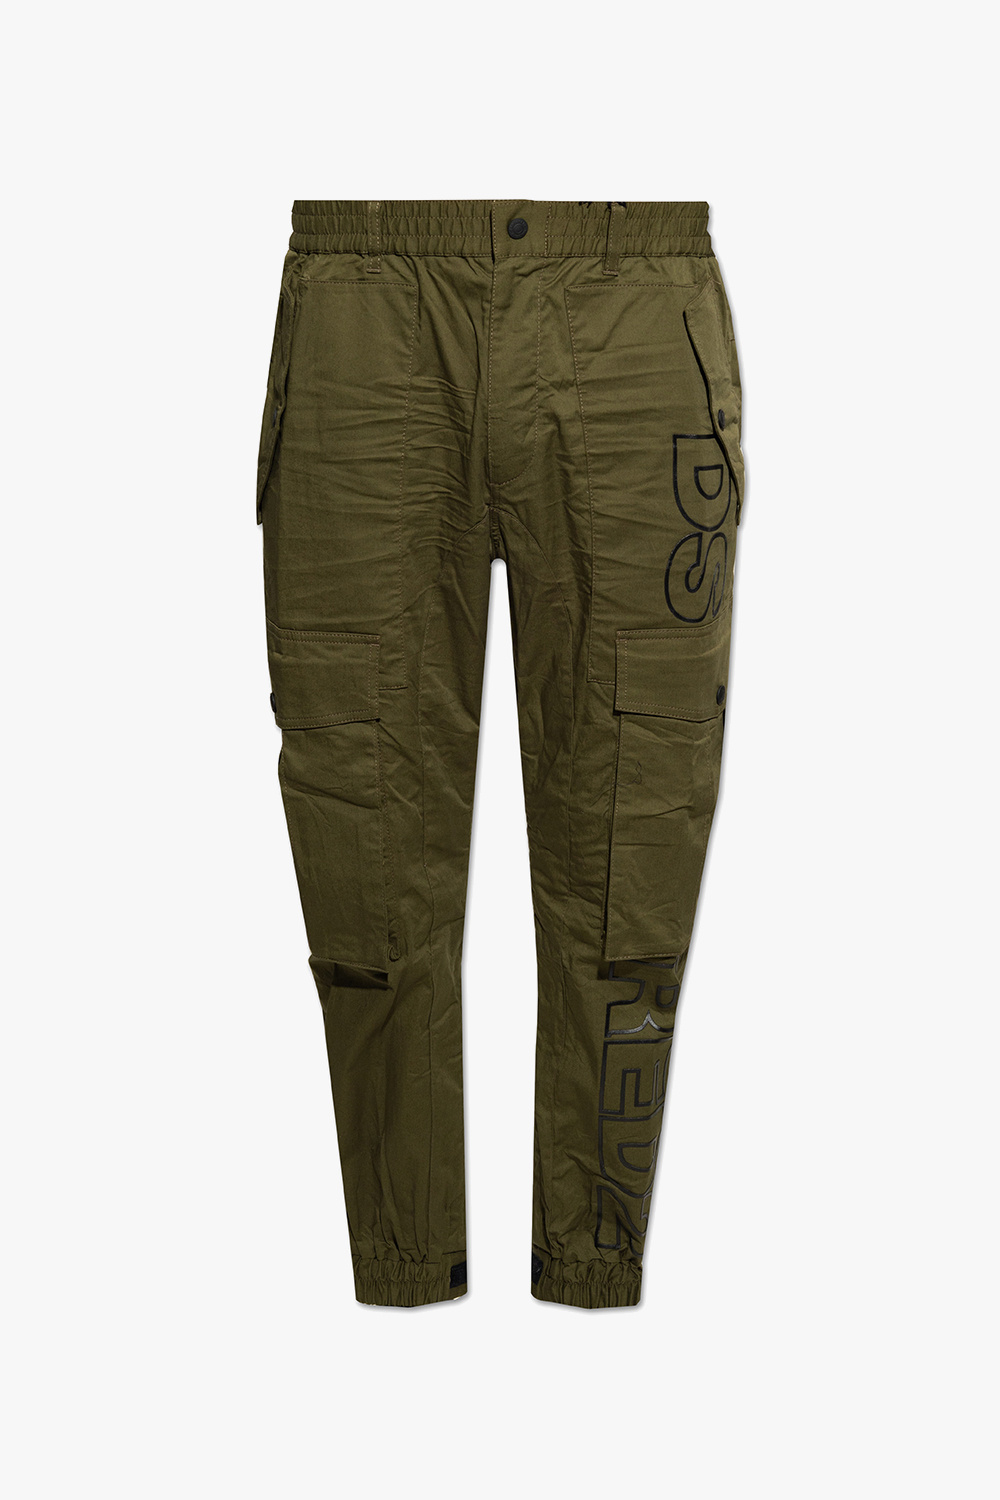 Dsquared2 ‘Cyprus’ trousers